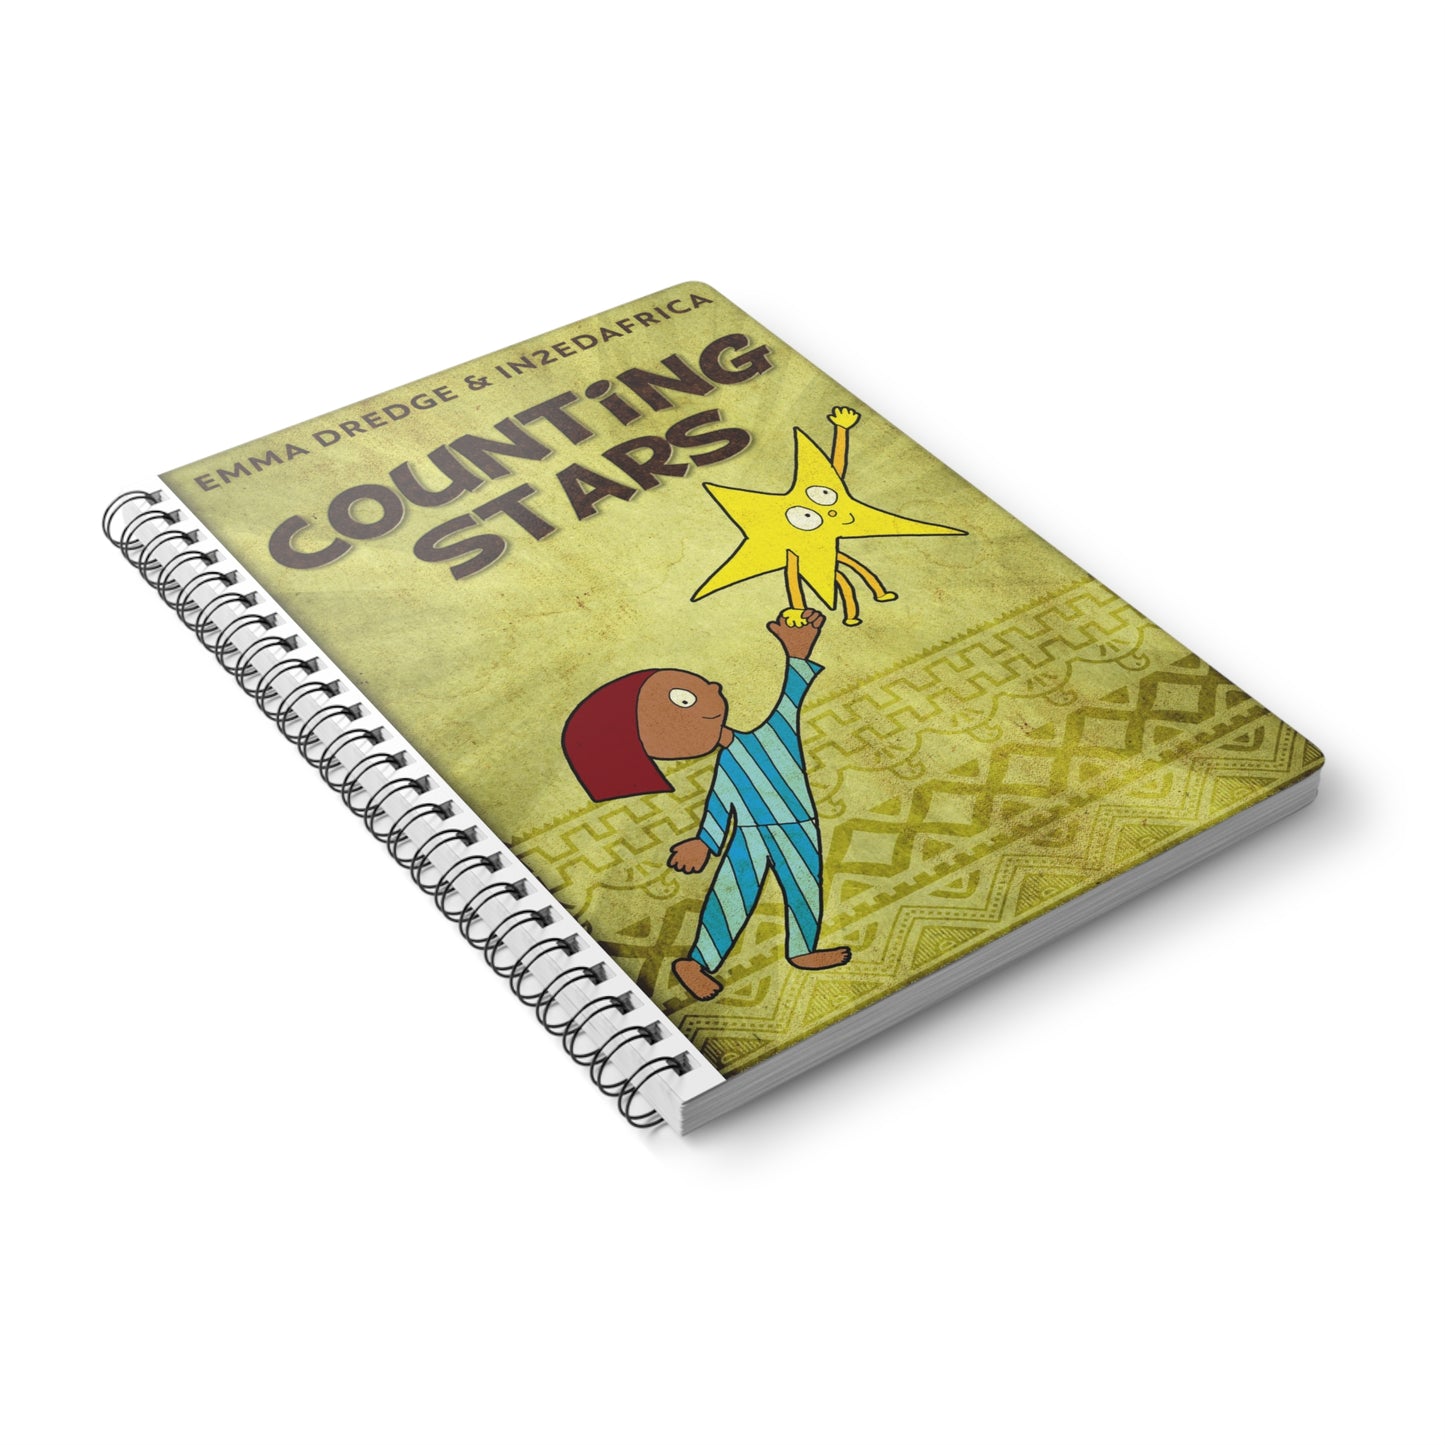 Counting Stars - A5 Wirebound Notebook